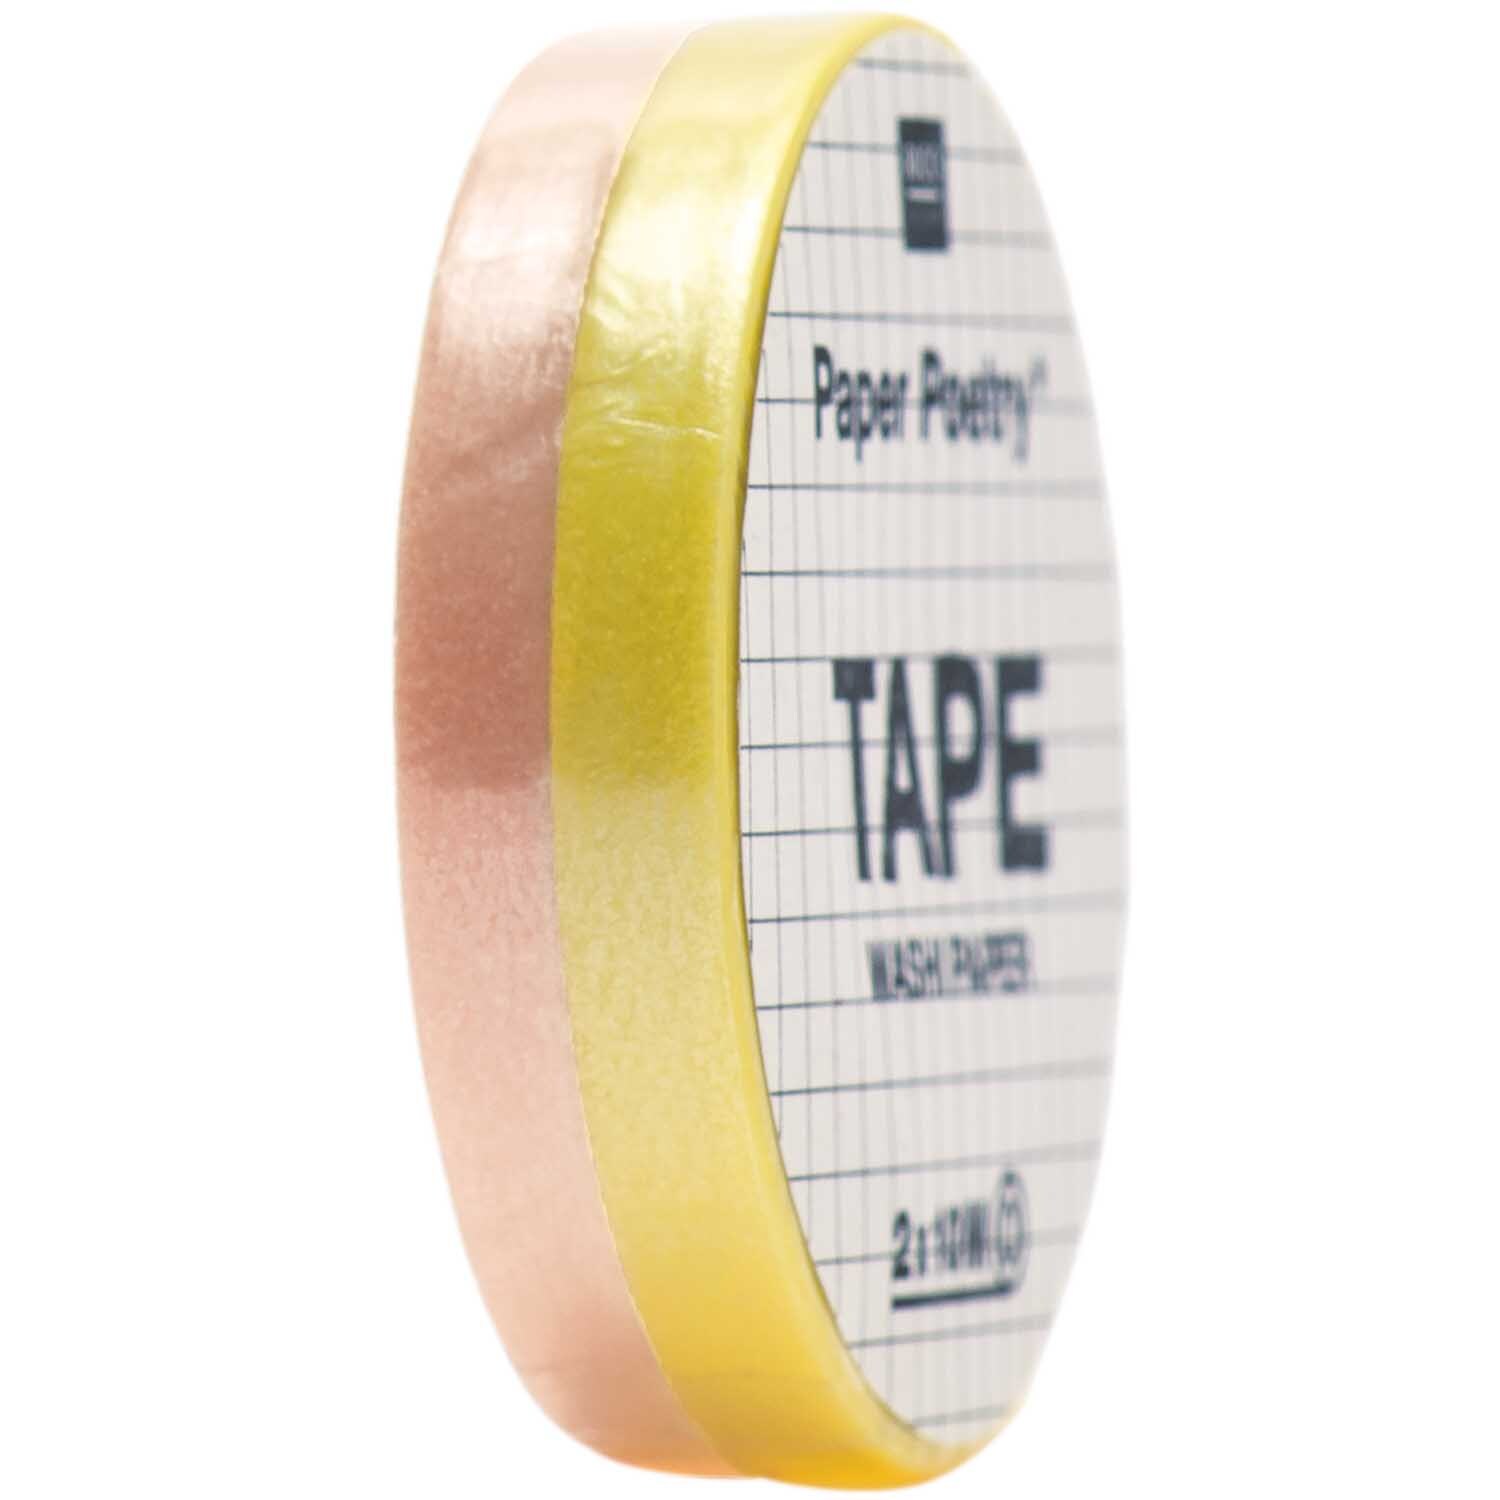 Paper Poetry Tapes uni 5mm 10m 2 Stück